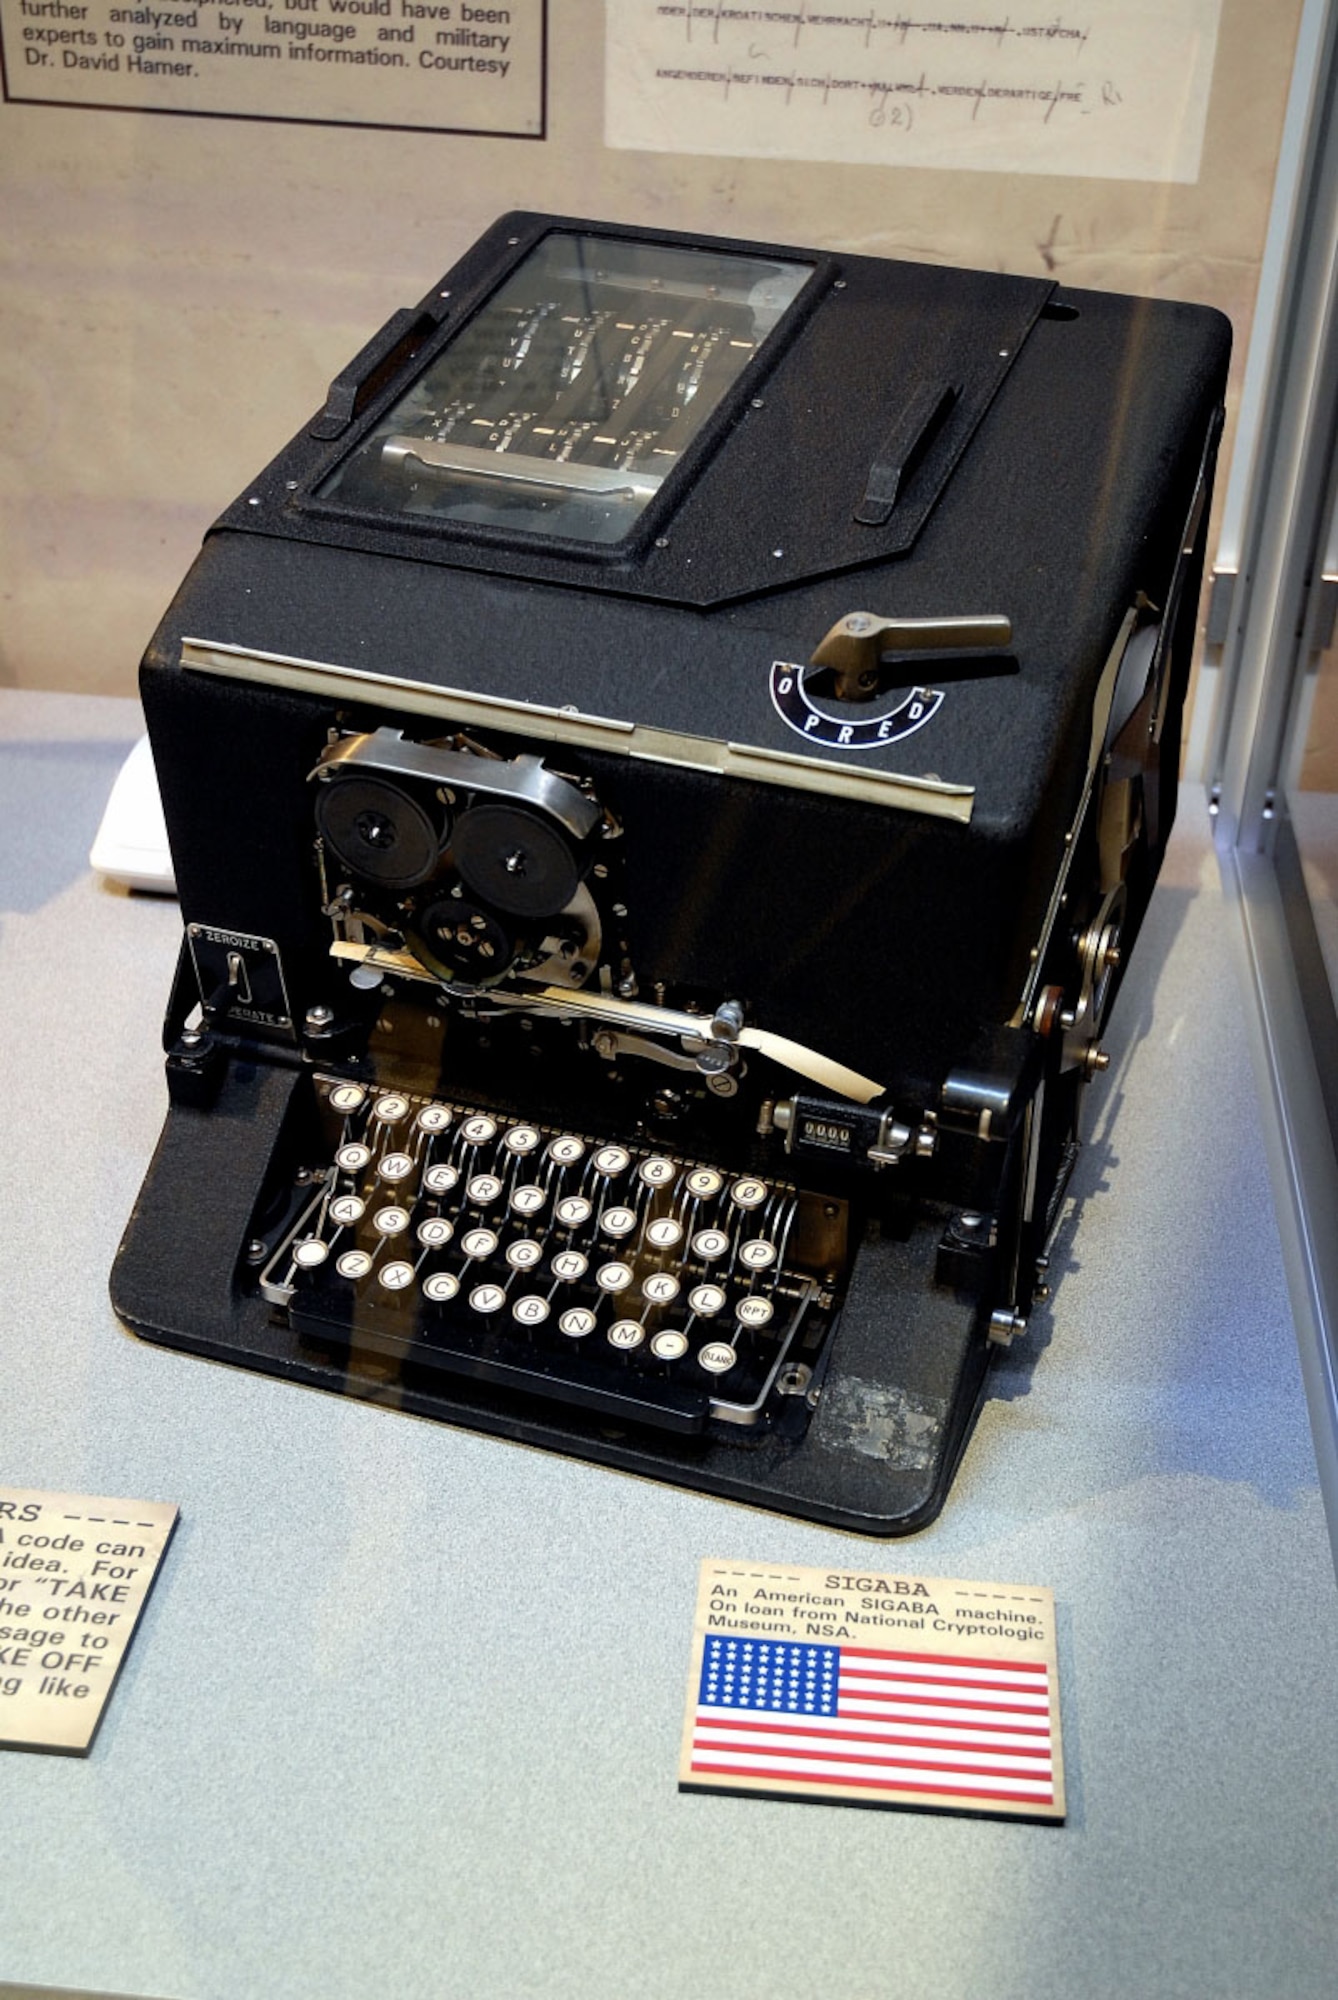 DAYTON, Ohio -- American SIGABA machine on display with the cryptology in exhibit in the World War II Gallery at the National Museum of the United States Air Force. (U.S. Air Force photo)